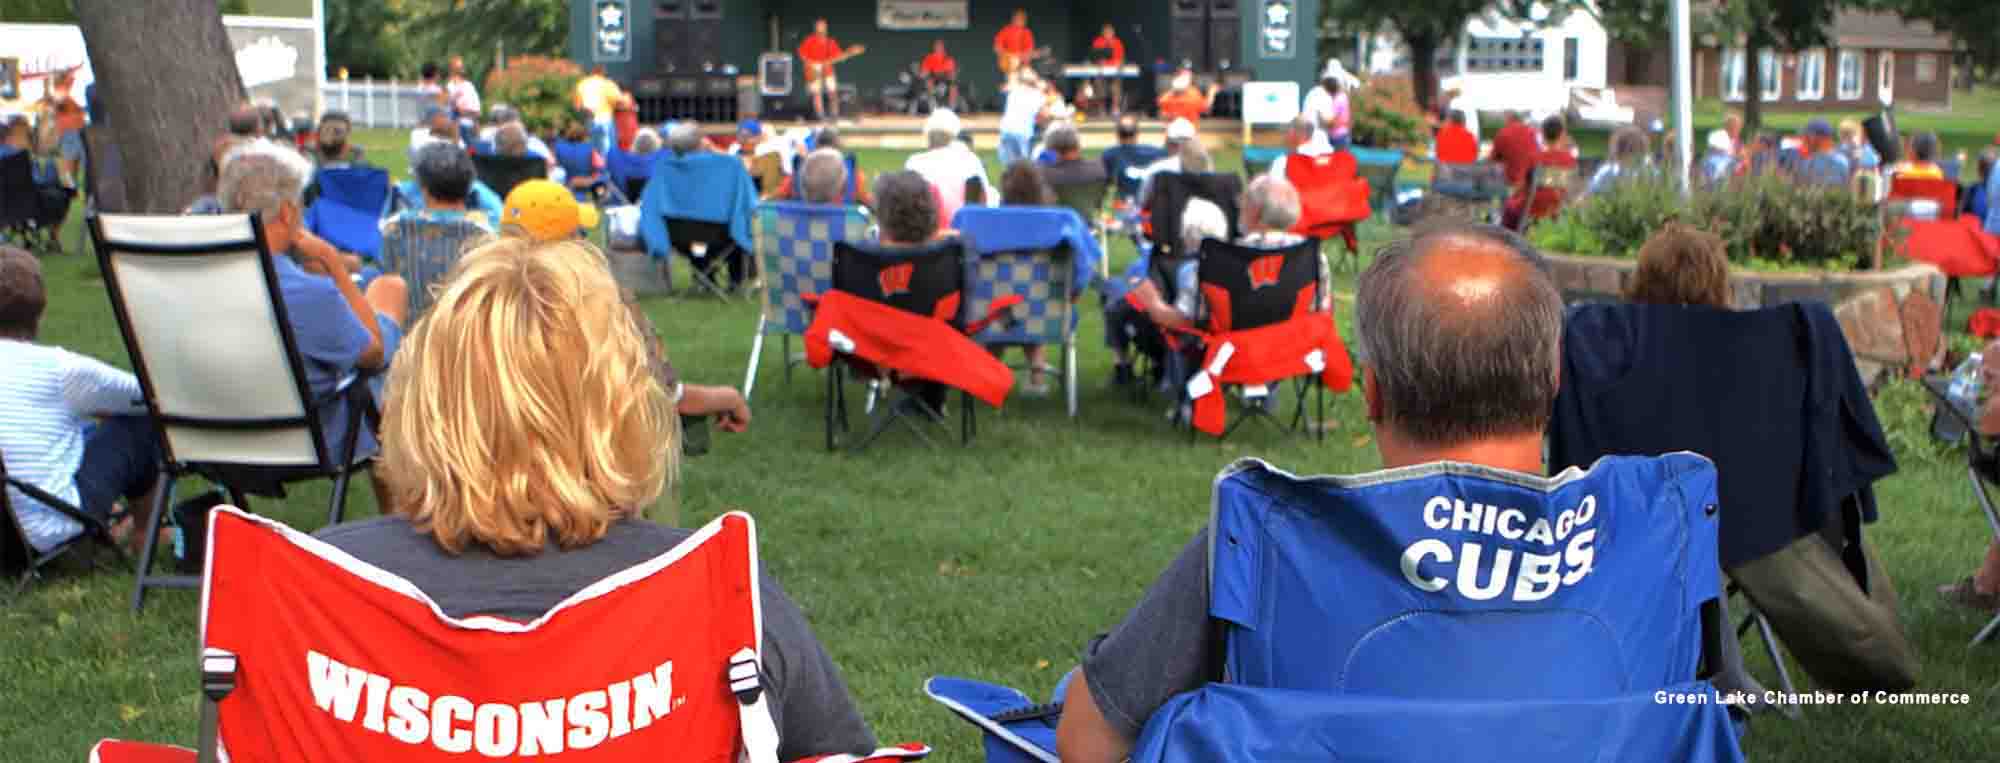 Green Lake Wisconsin Concerts in the Park Adeline's House of Cool